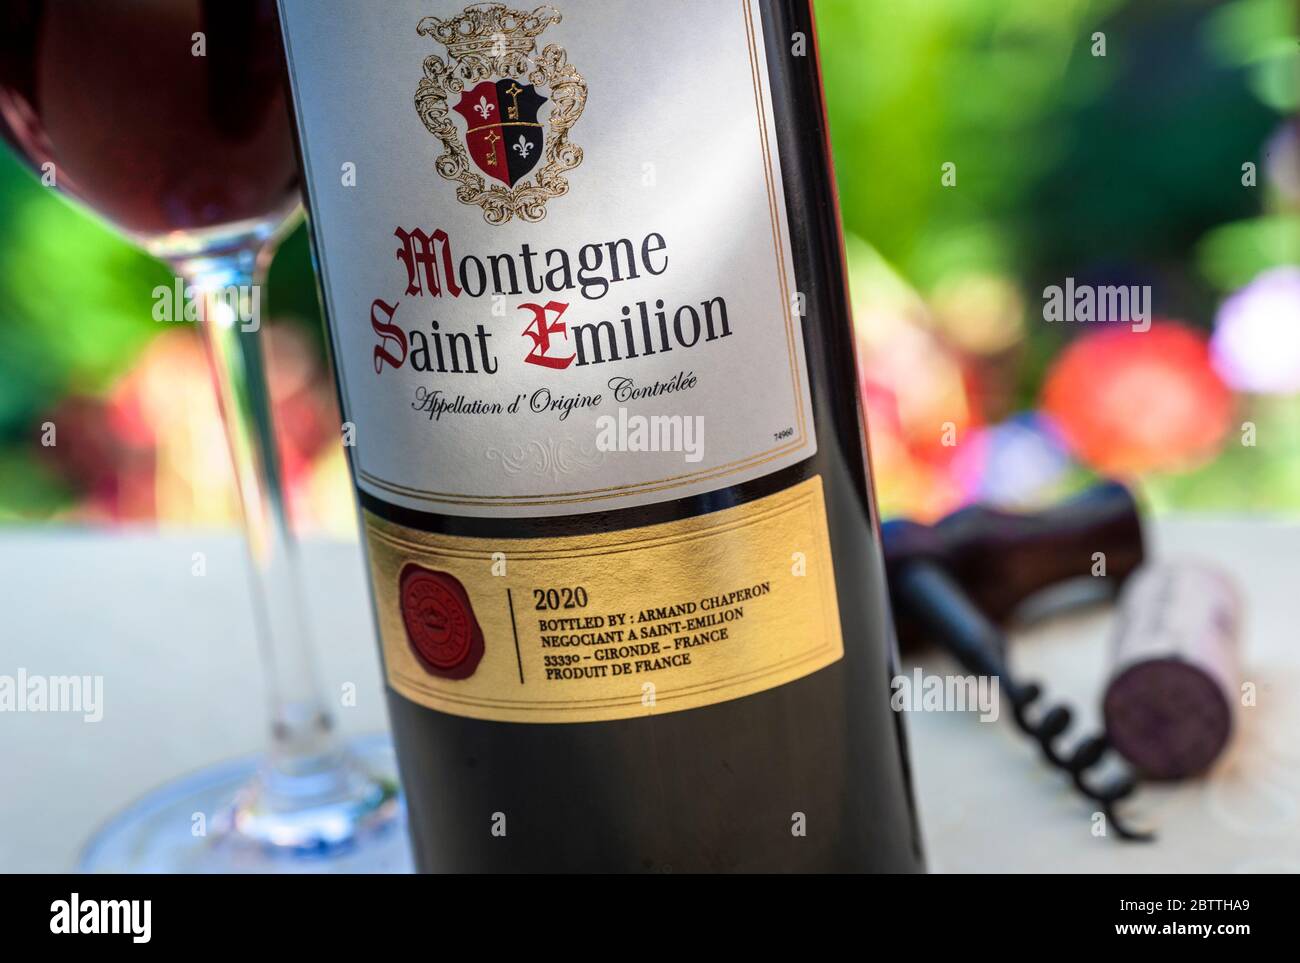 SAINT EMILION Bottle and glass of  post dated '2020' Montagne Saint-Emilion wine in alfresco wine tasting situation on French garden terrace table Stock Photo